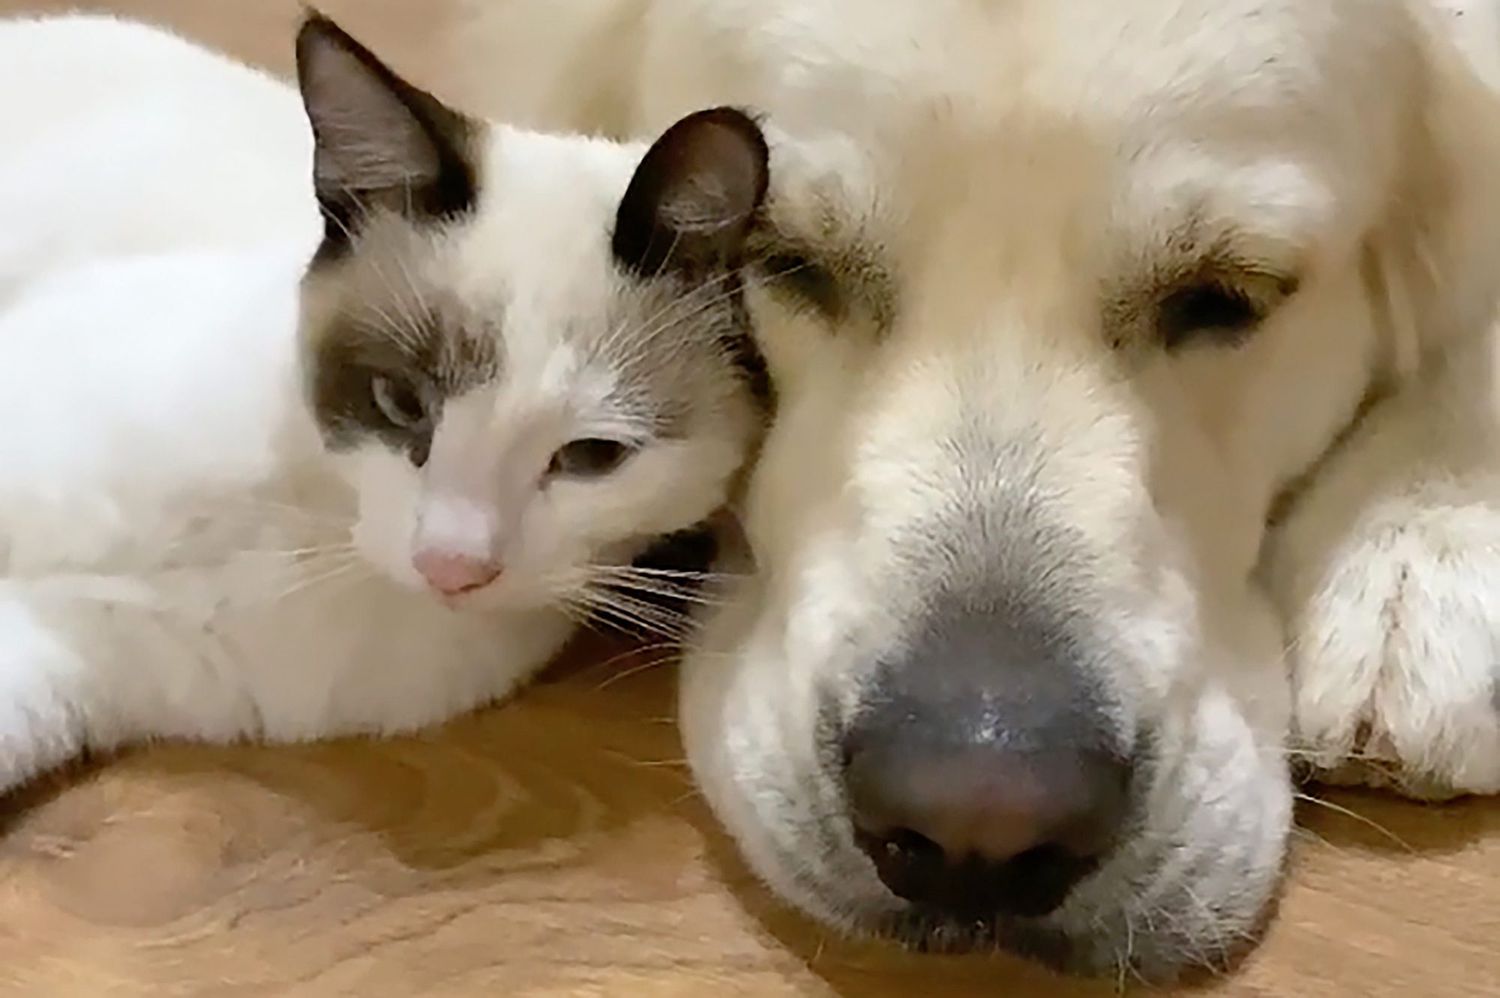 Bailey, the Golden Retriever, snuggling with a grey and white kitten